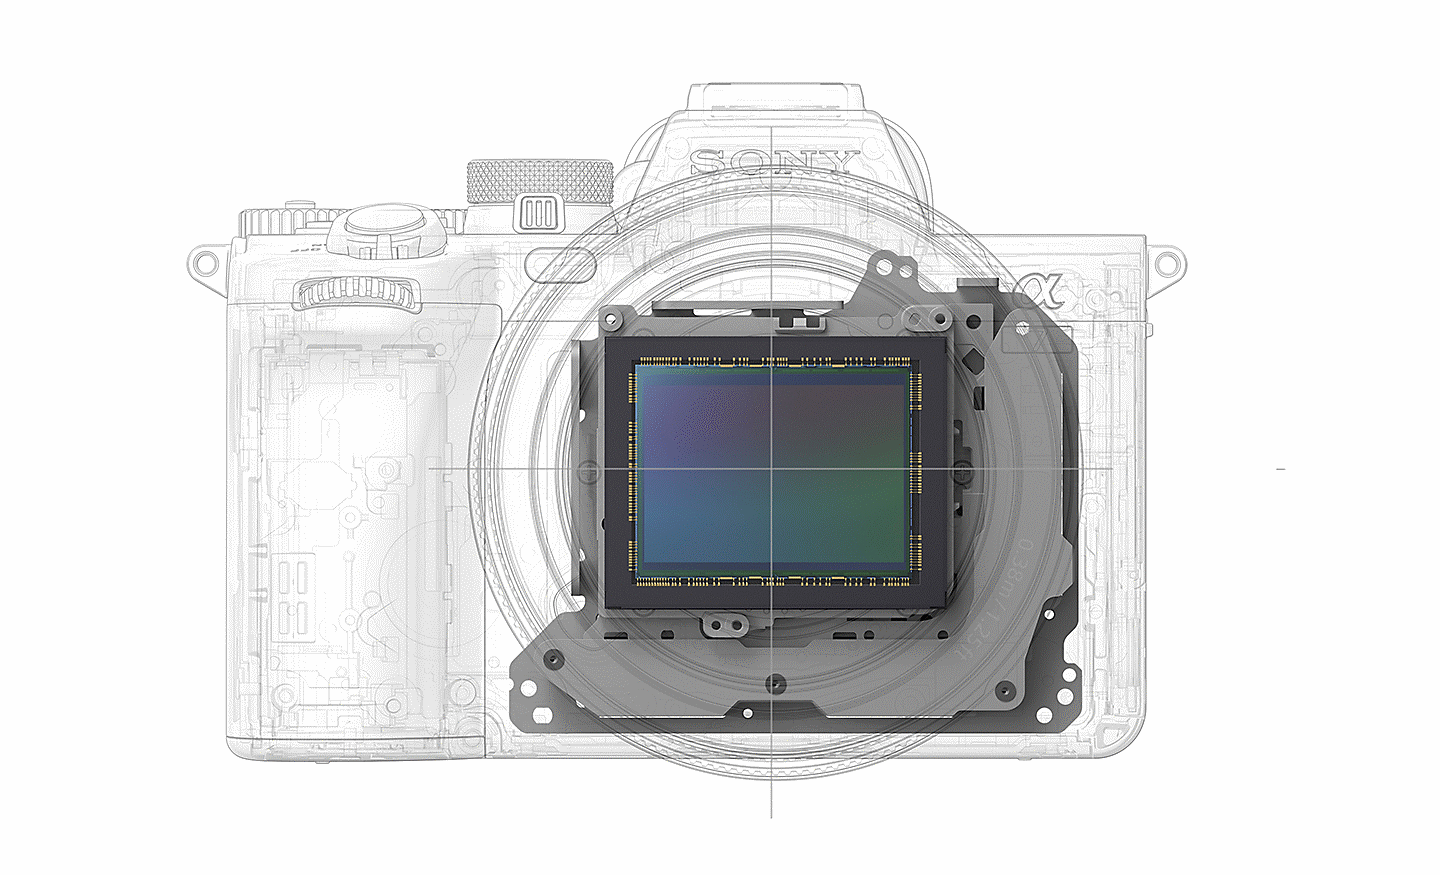 Illustration showing 5-axis image stabilization